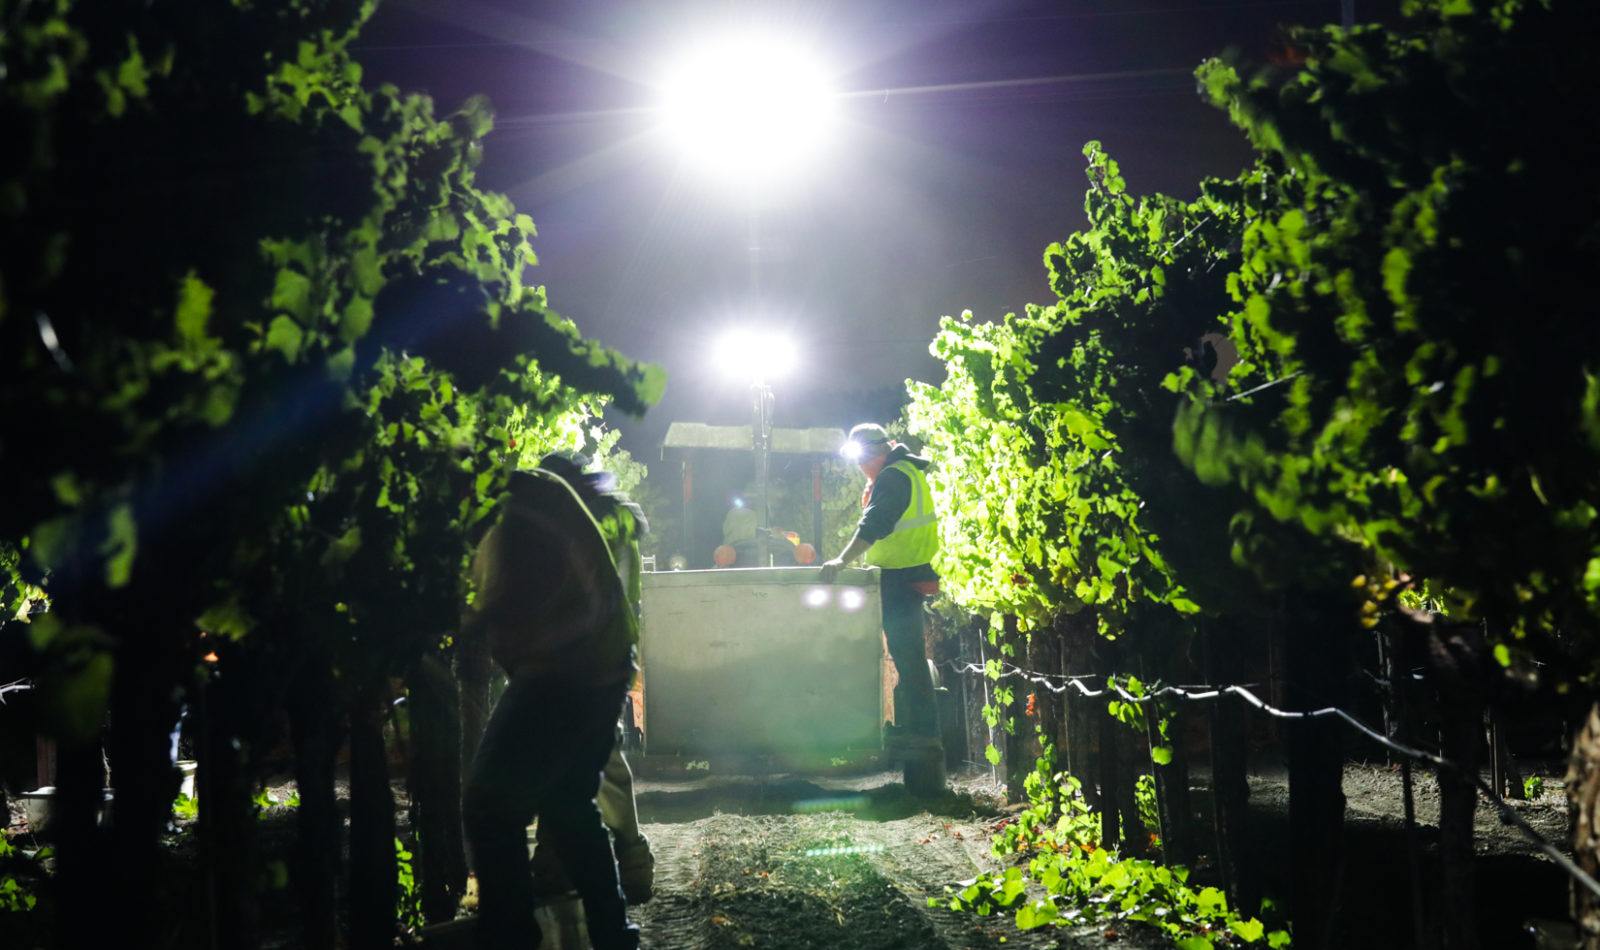 tractor with bright light in the middle of the night in a vineyard